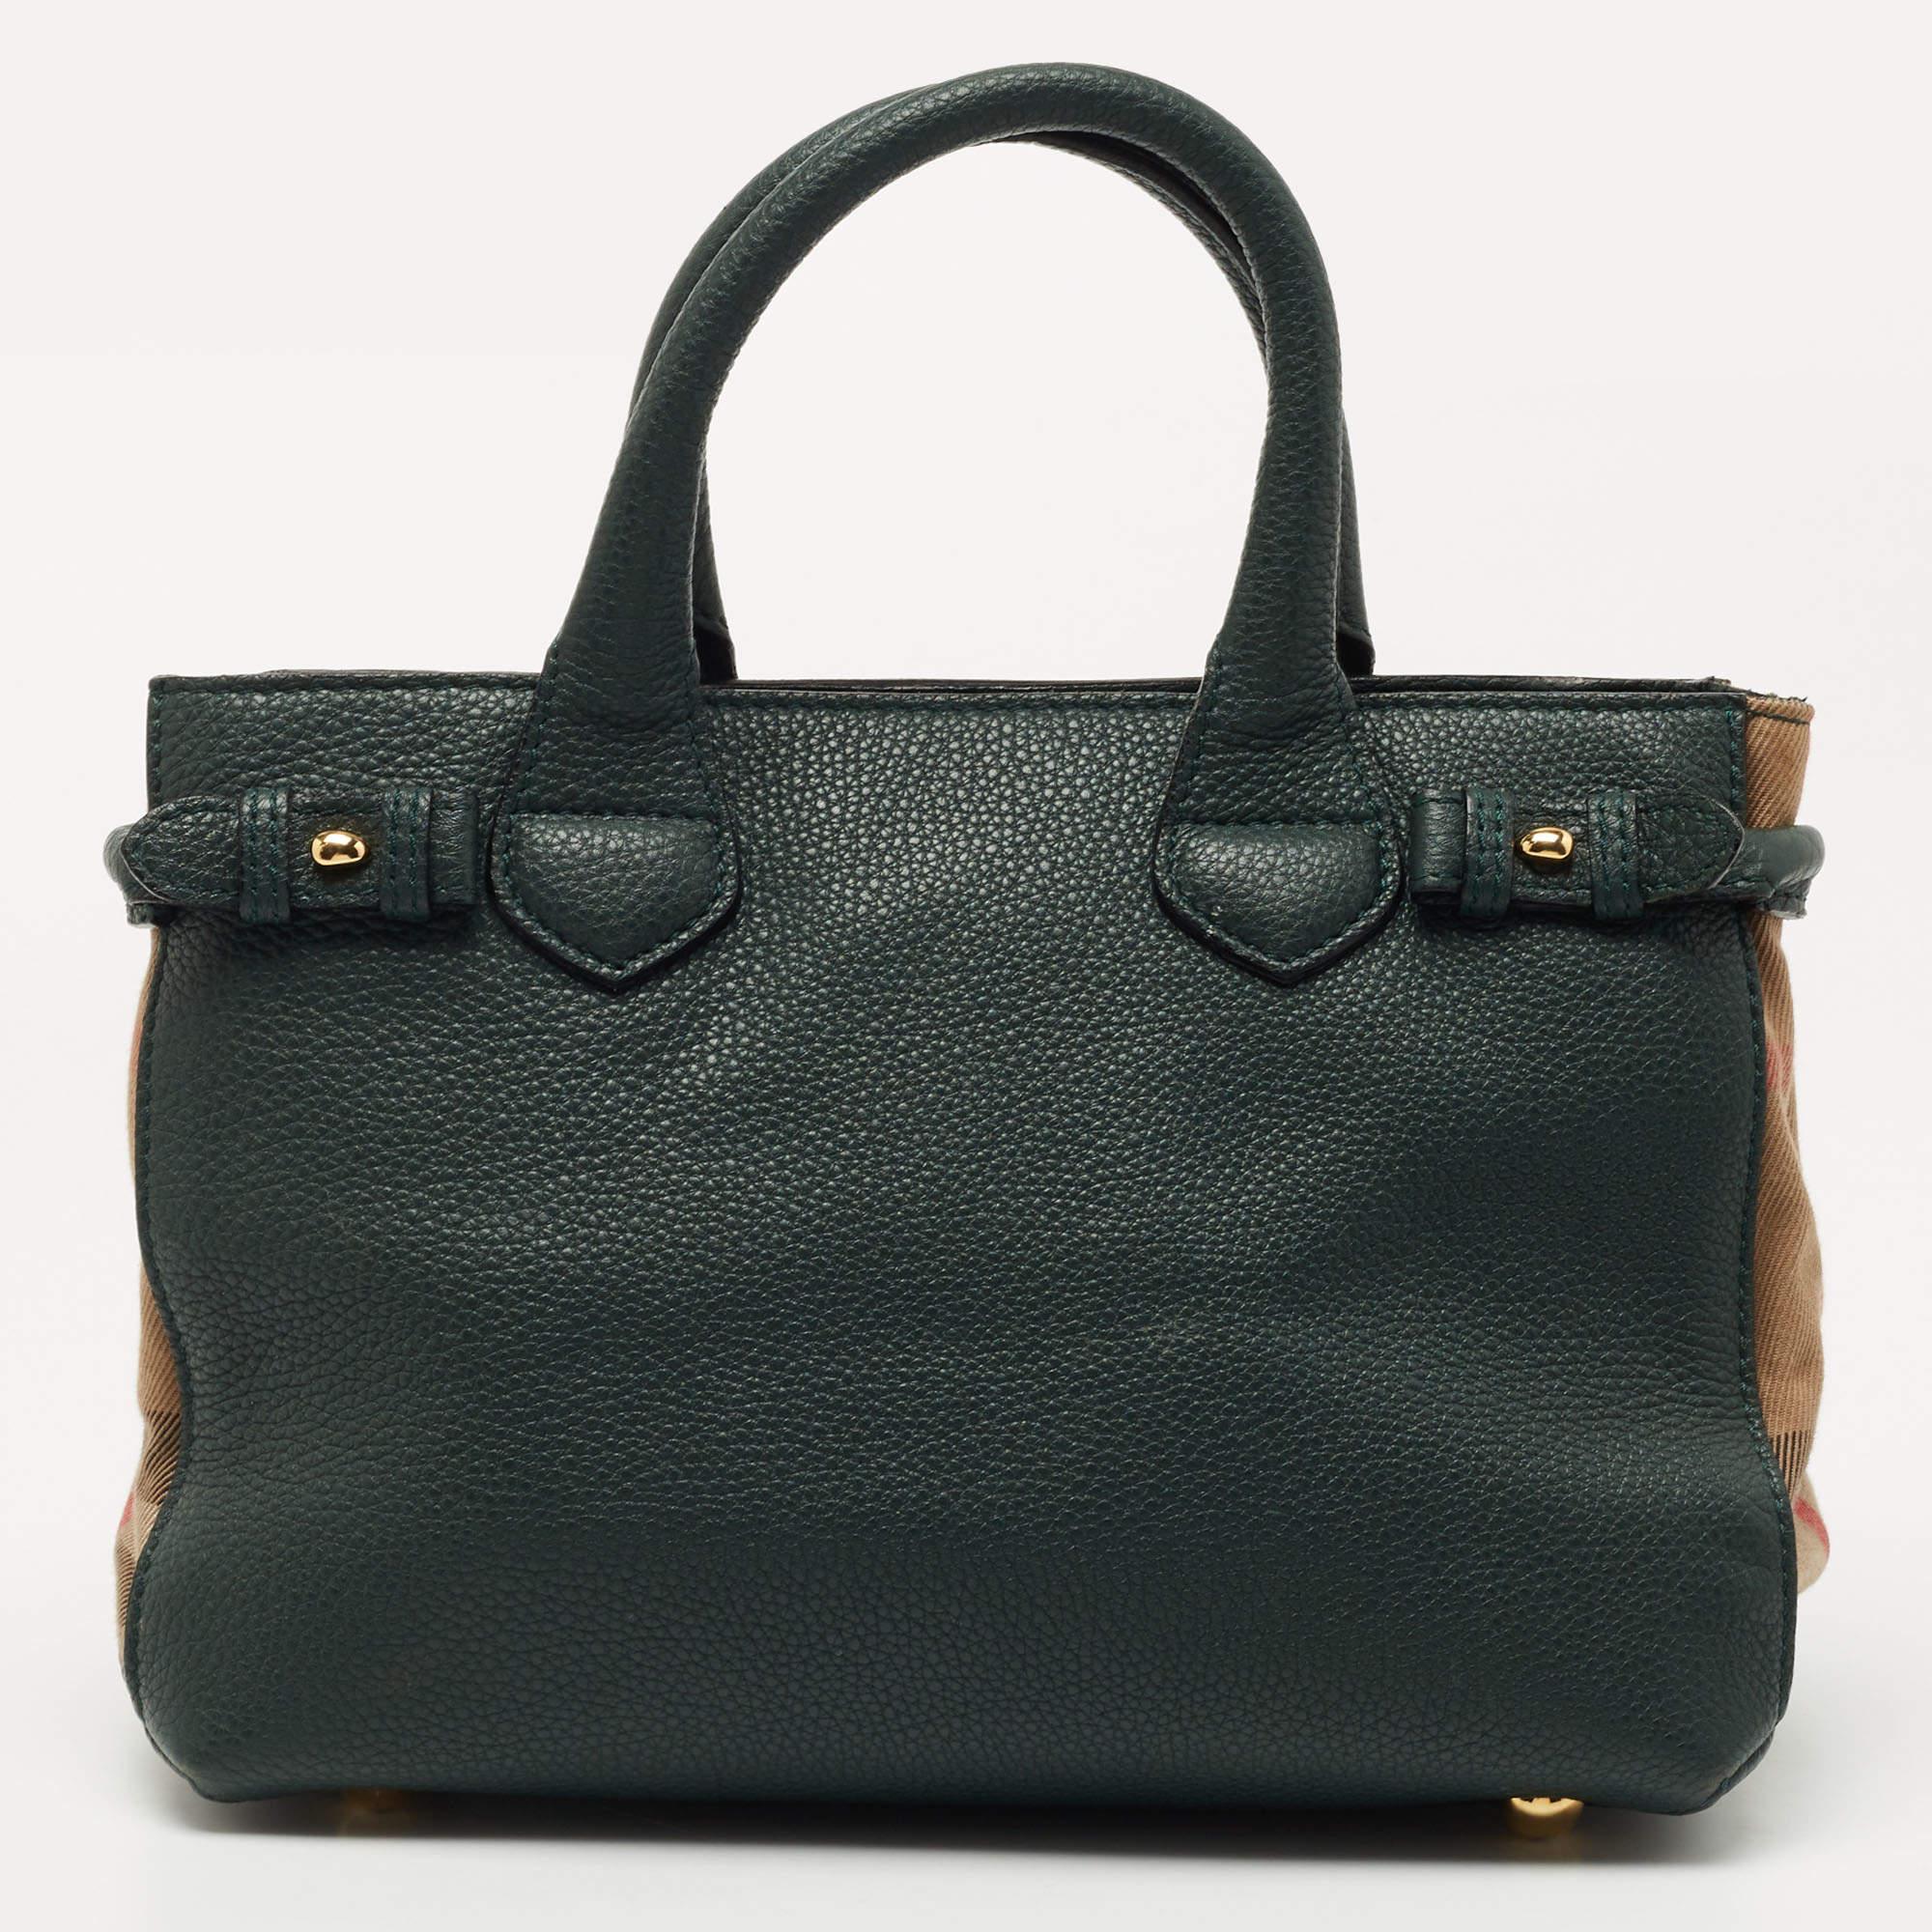 Inspired by equestrian styles from the Burberry Heritage Archive, this Banner tote exudes brilliance and outstanding craftsmanship. The tote is made from leather and is styled with a House check canvas on the sides. It features dual handles and a